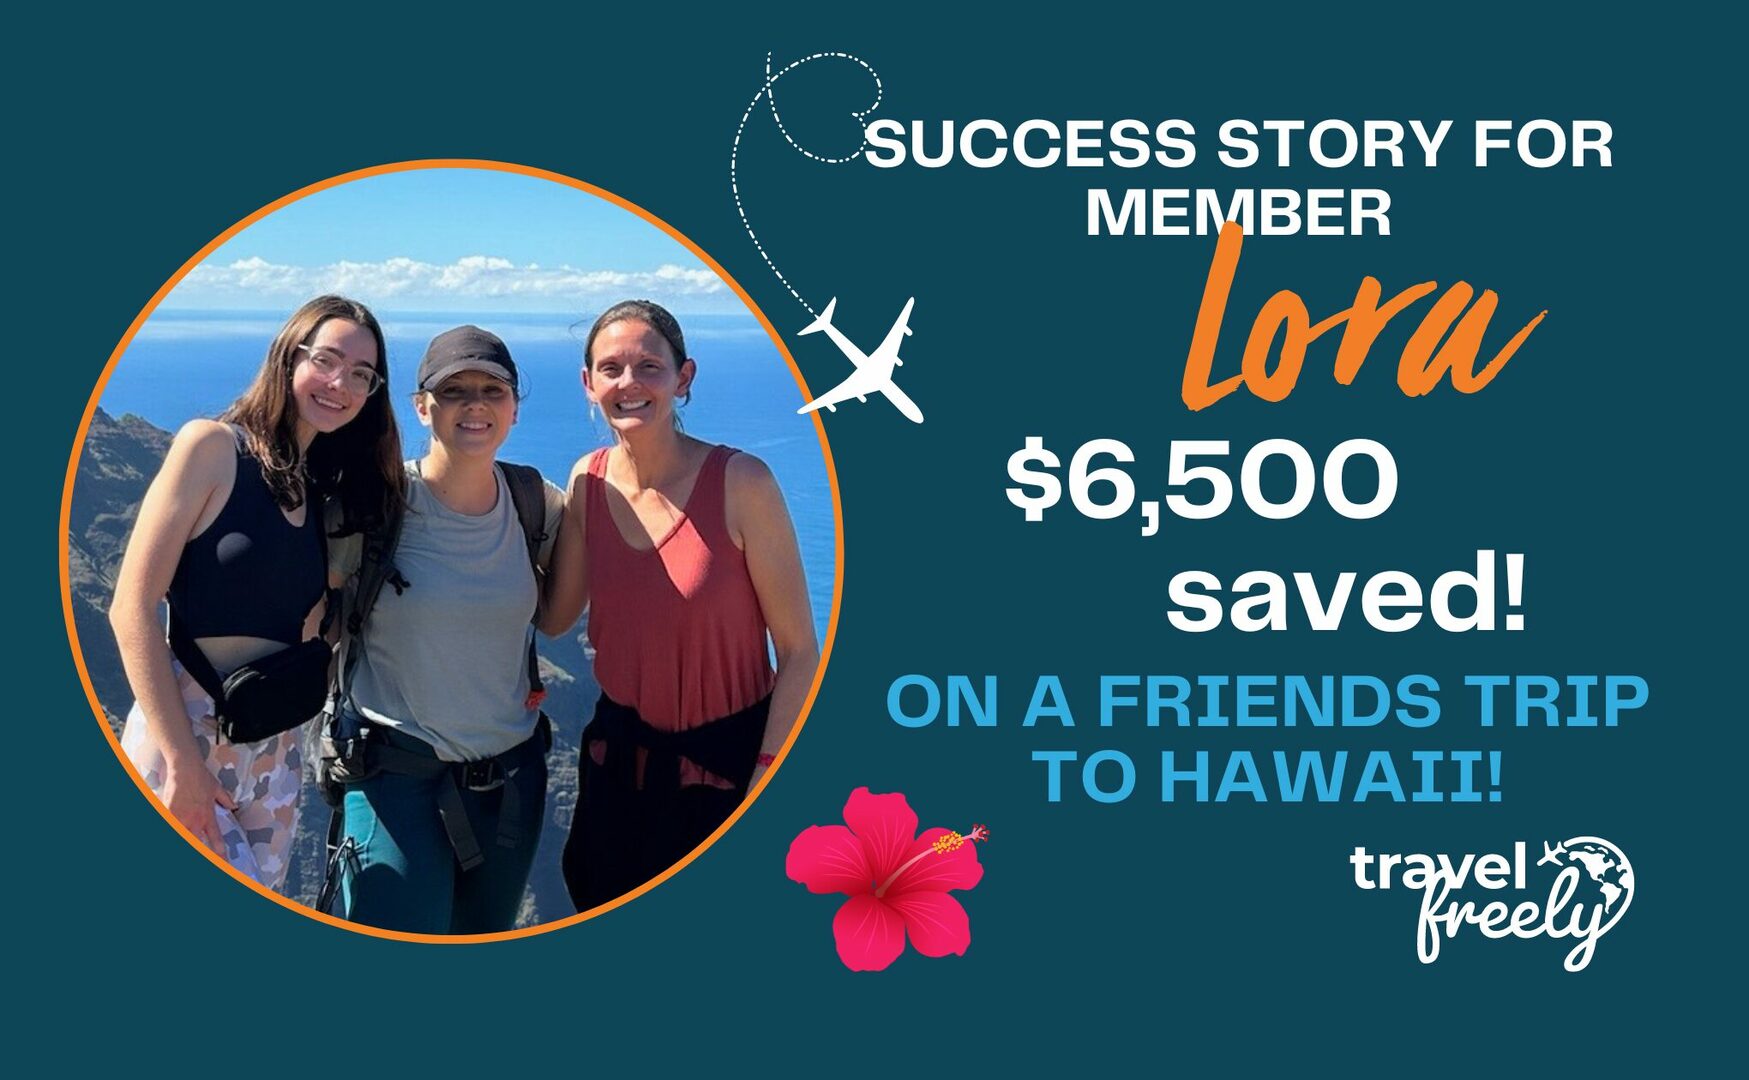 Travel Freely Success Story: $6,500 Saved on Friends Trip to Hawaii!